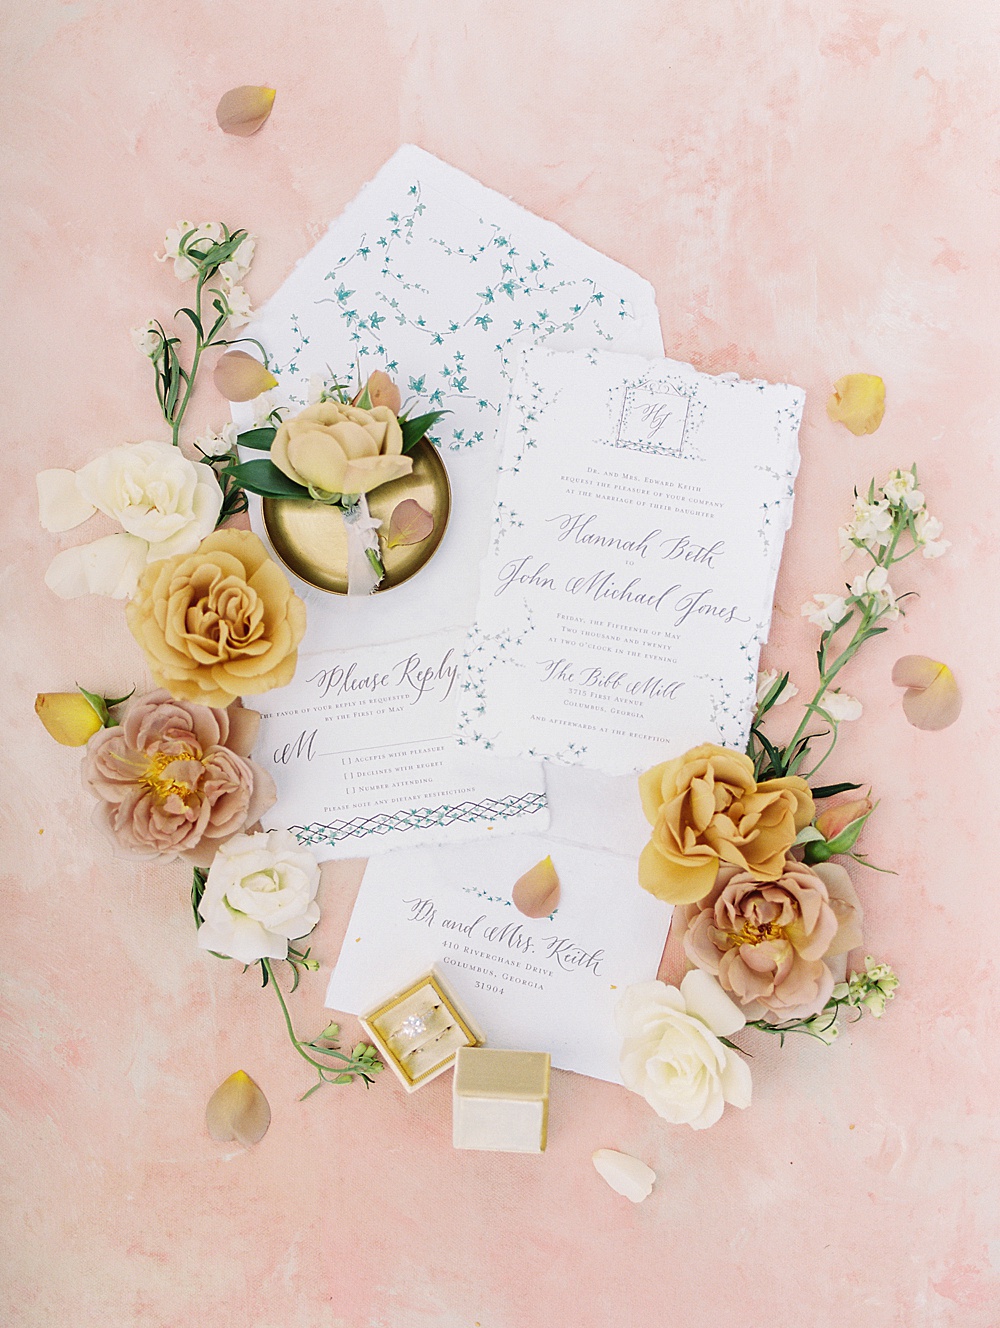 Hand torn invitation suite on a pink styling mat with yellow and blush flowers